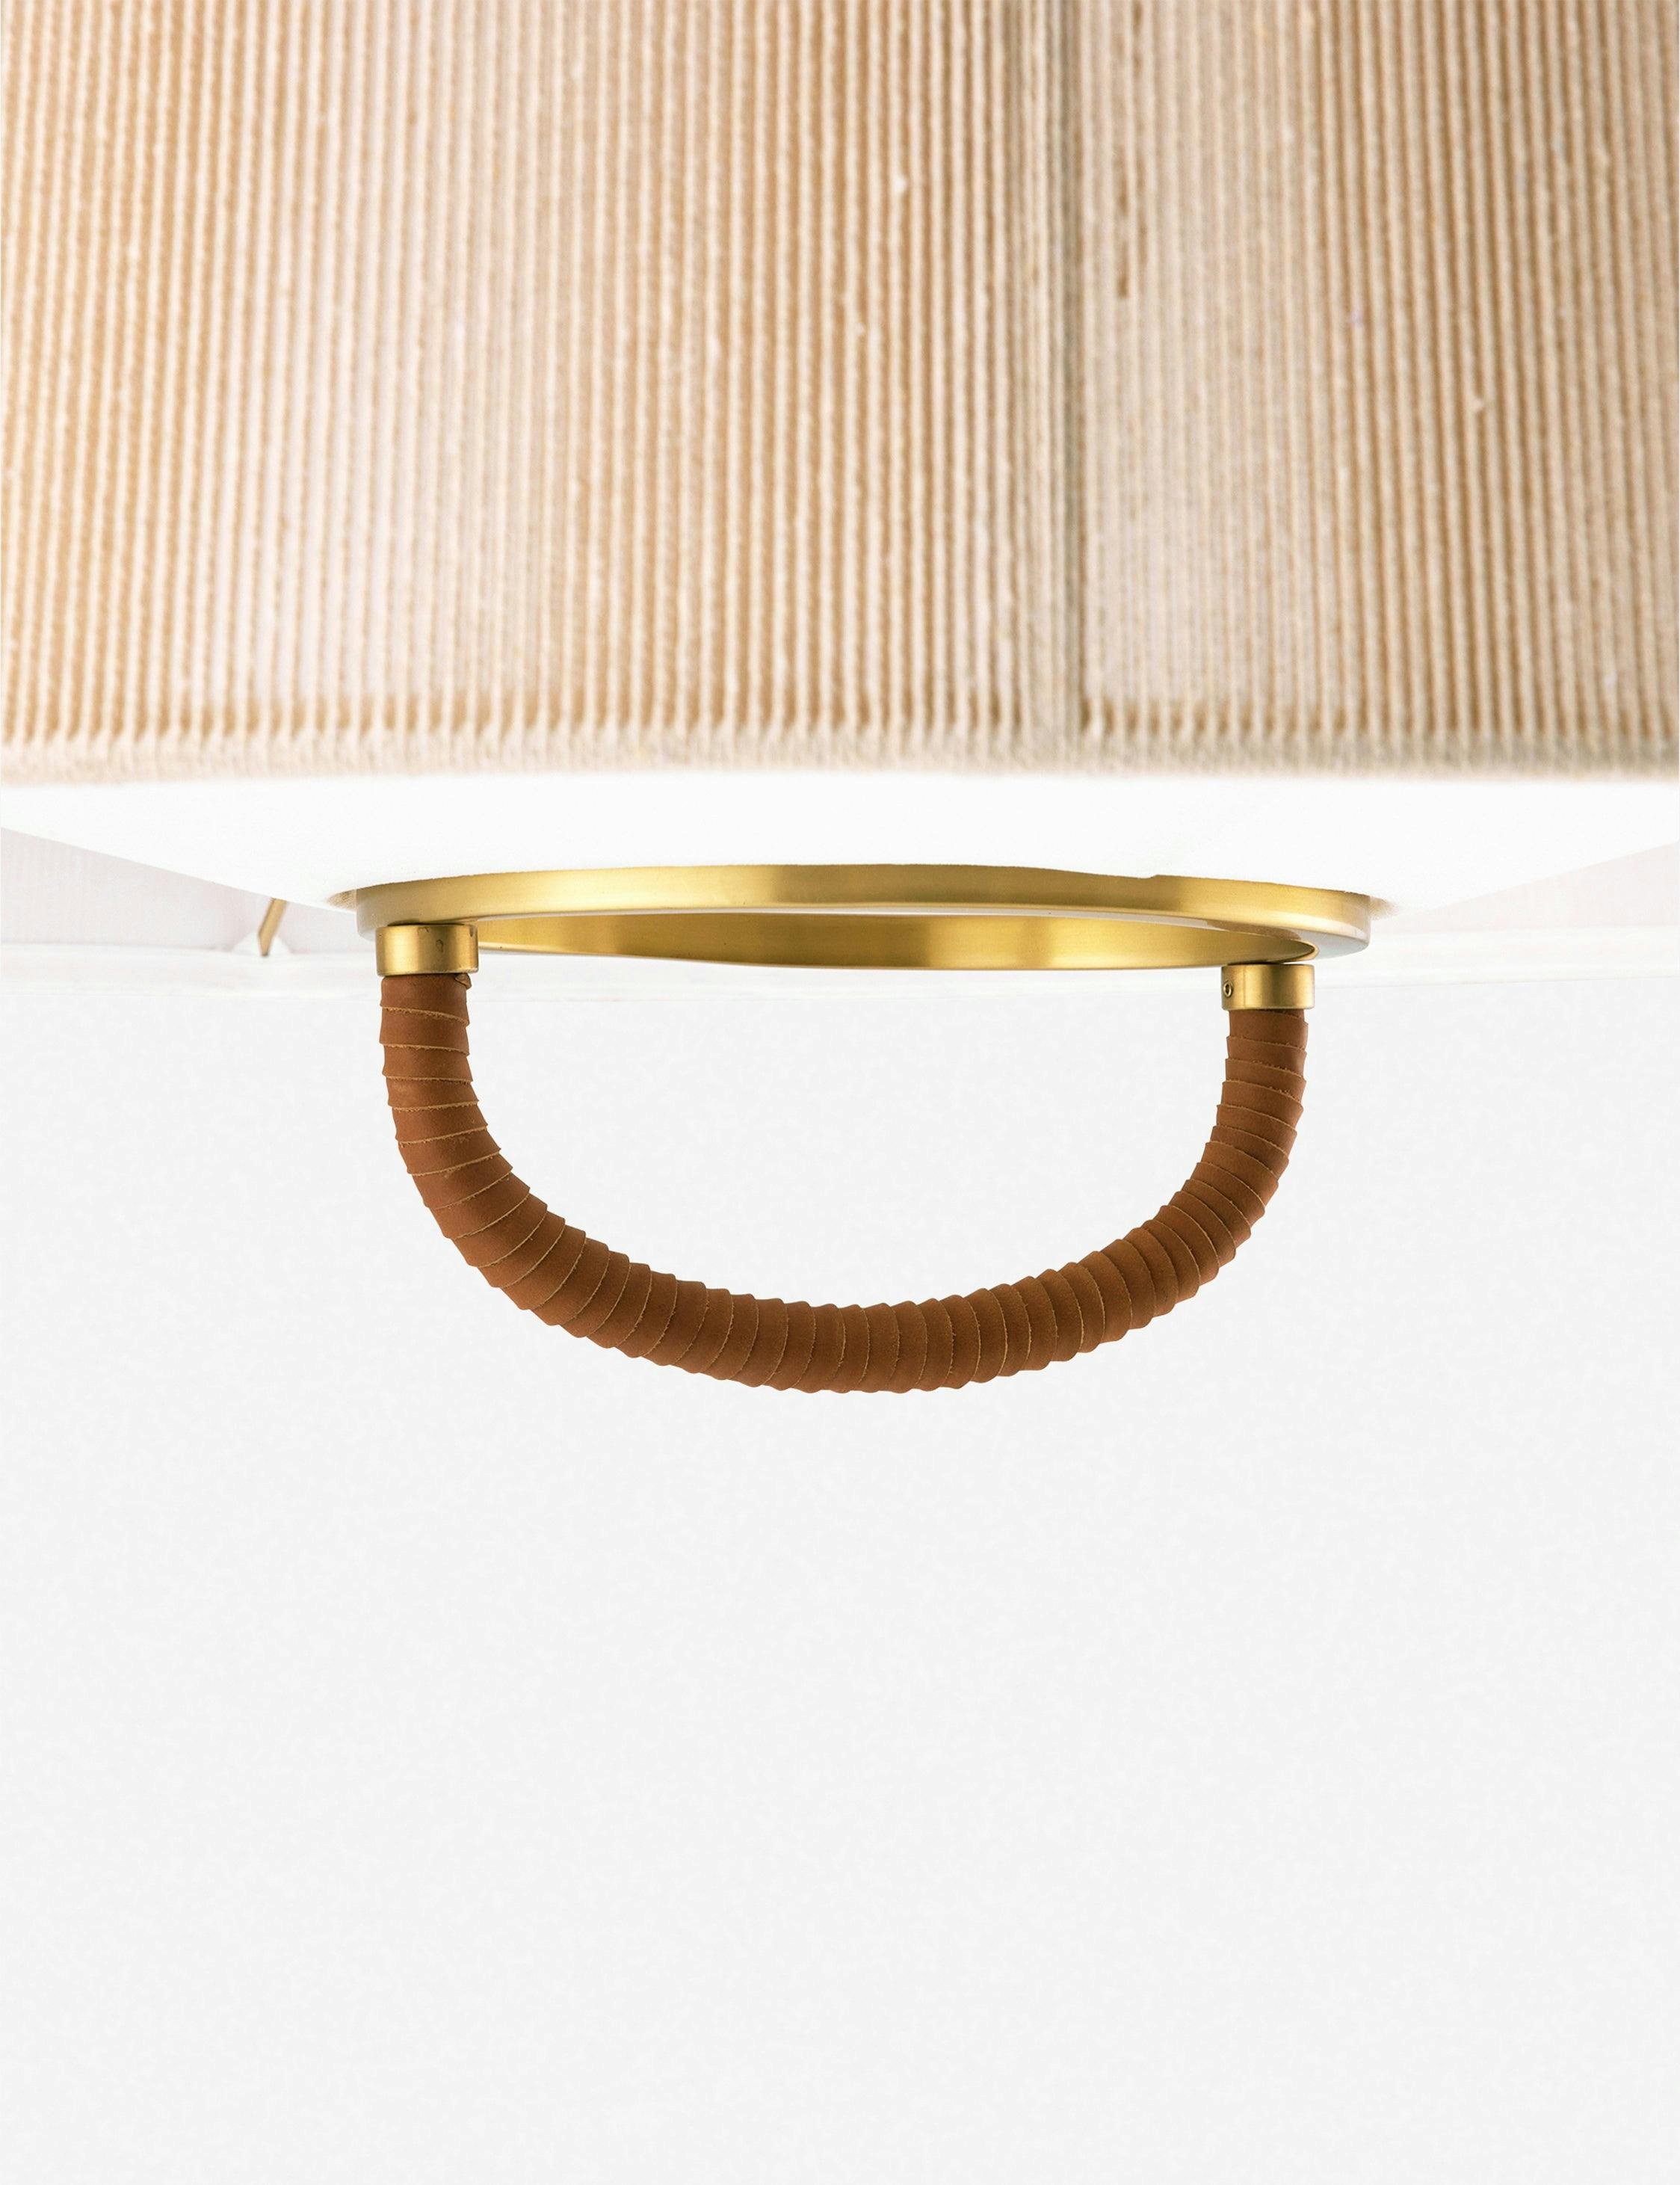 Middlebury Pendant Light by Arteriors - Natural / 28.5" Dia